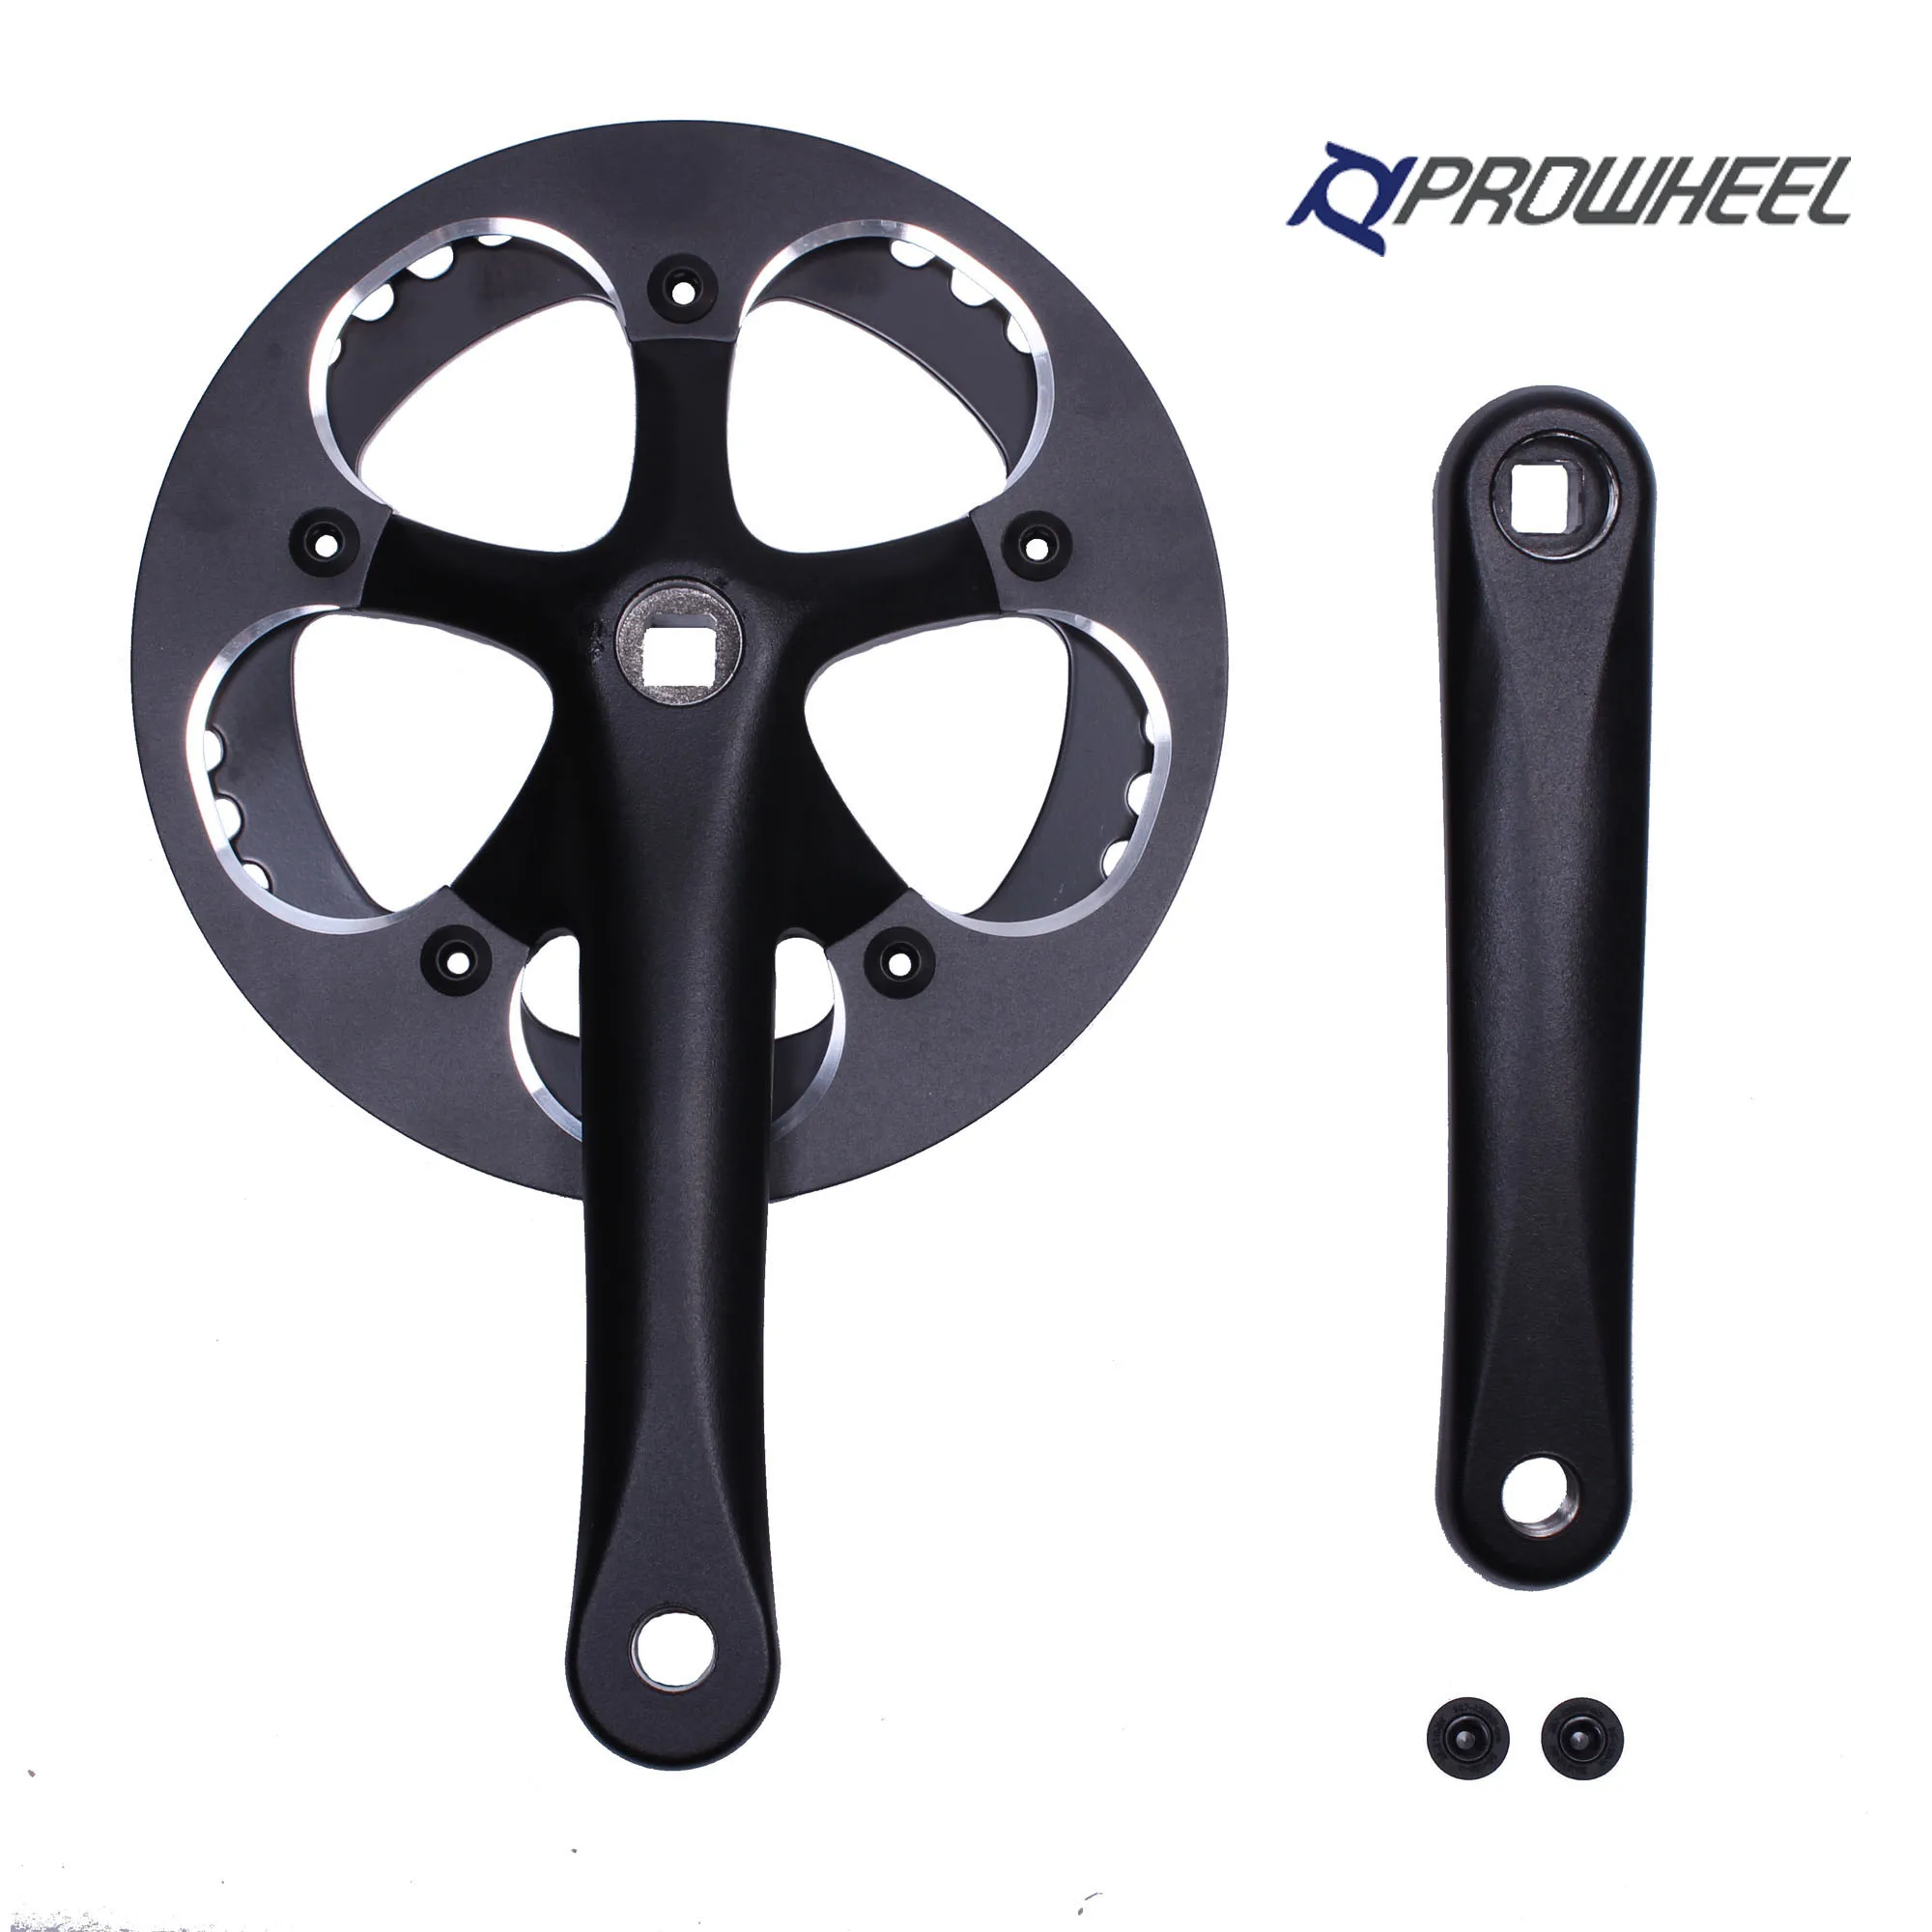 

PROWHEEL 42T 130MM BCD 170MM Bike Crankset ChainWheel and Replacement Chain Guard,Compatible with City Bike,MTB,EBIKE,Cargo